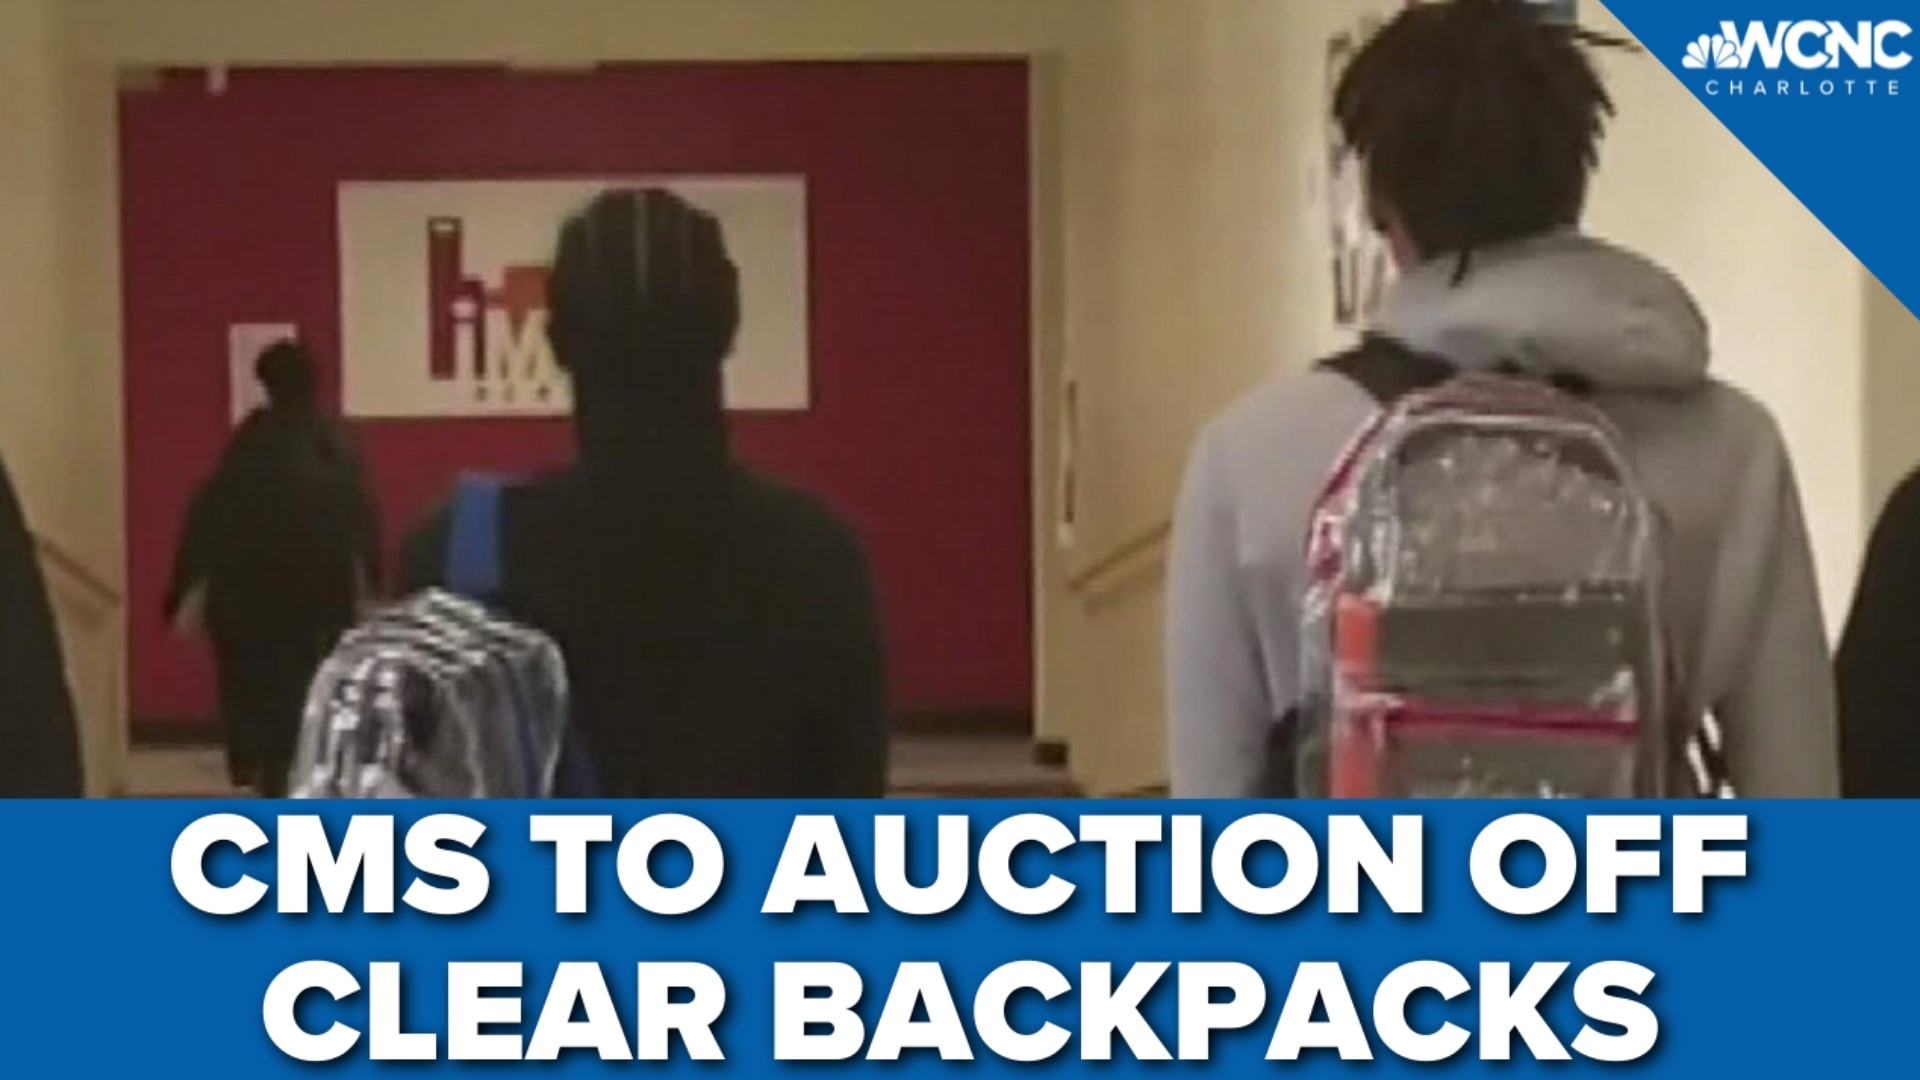 After Charlotte-Mecklenburg Schools invested nearly half a million dollars into clear backpacks for high schoolers, they’ll now be auctioned off before the summer.